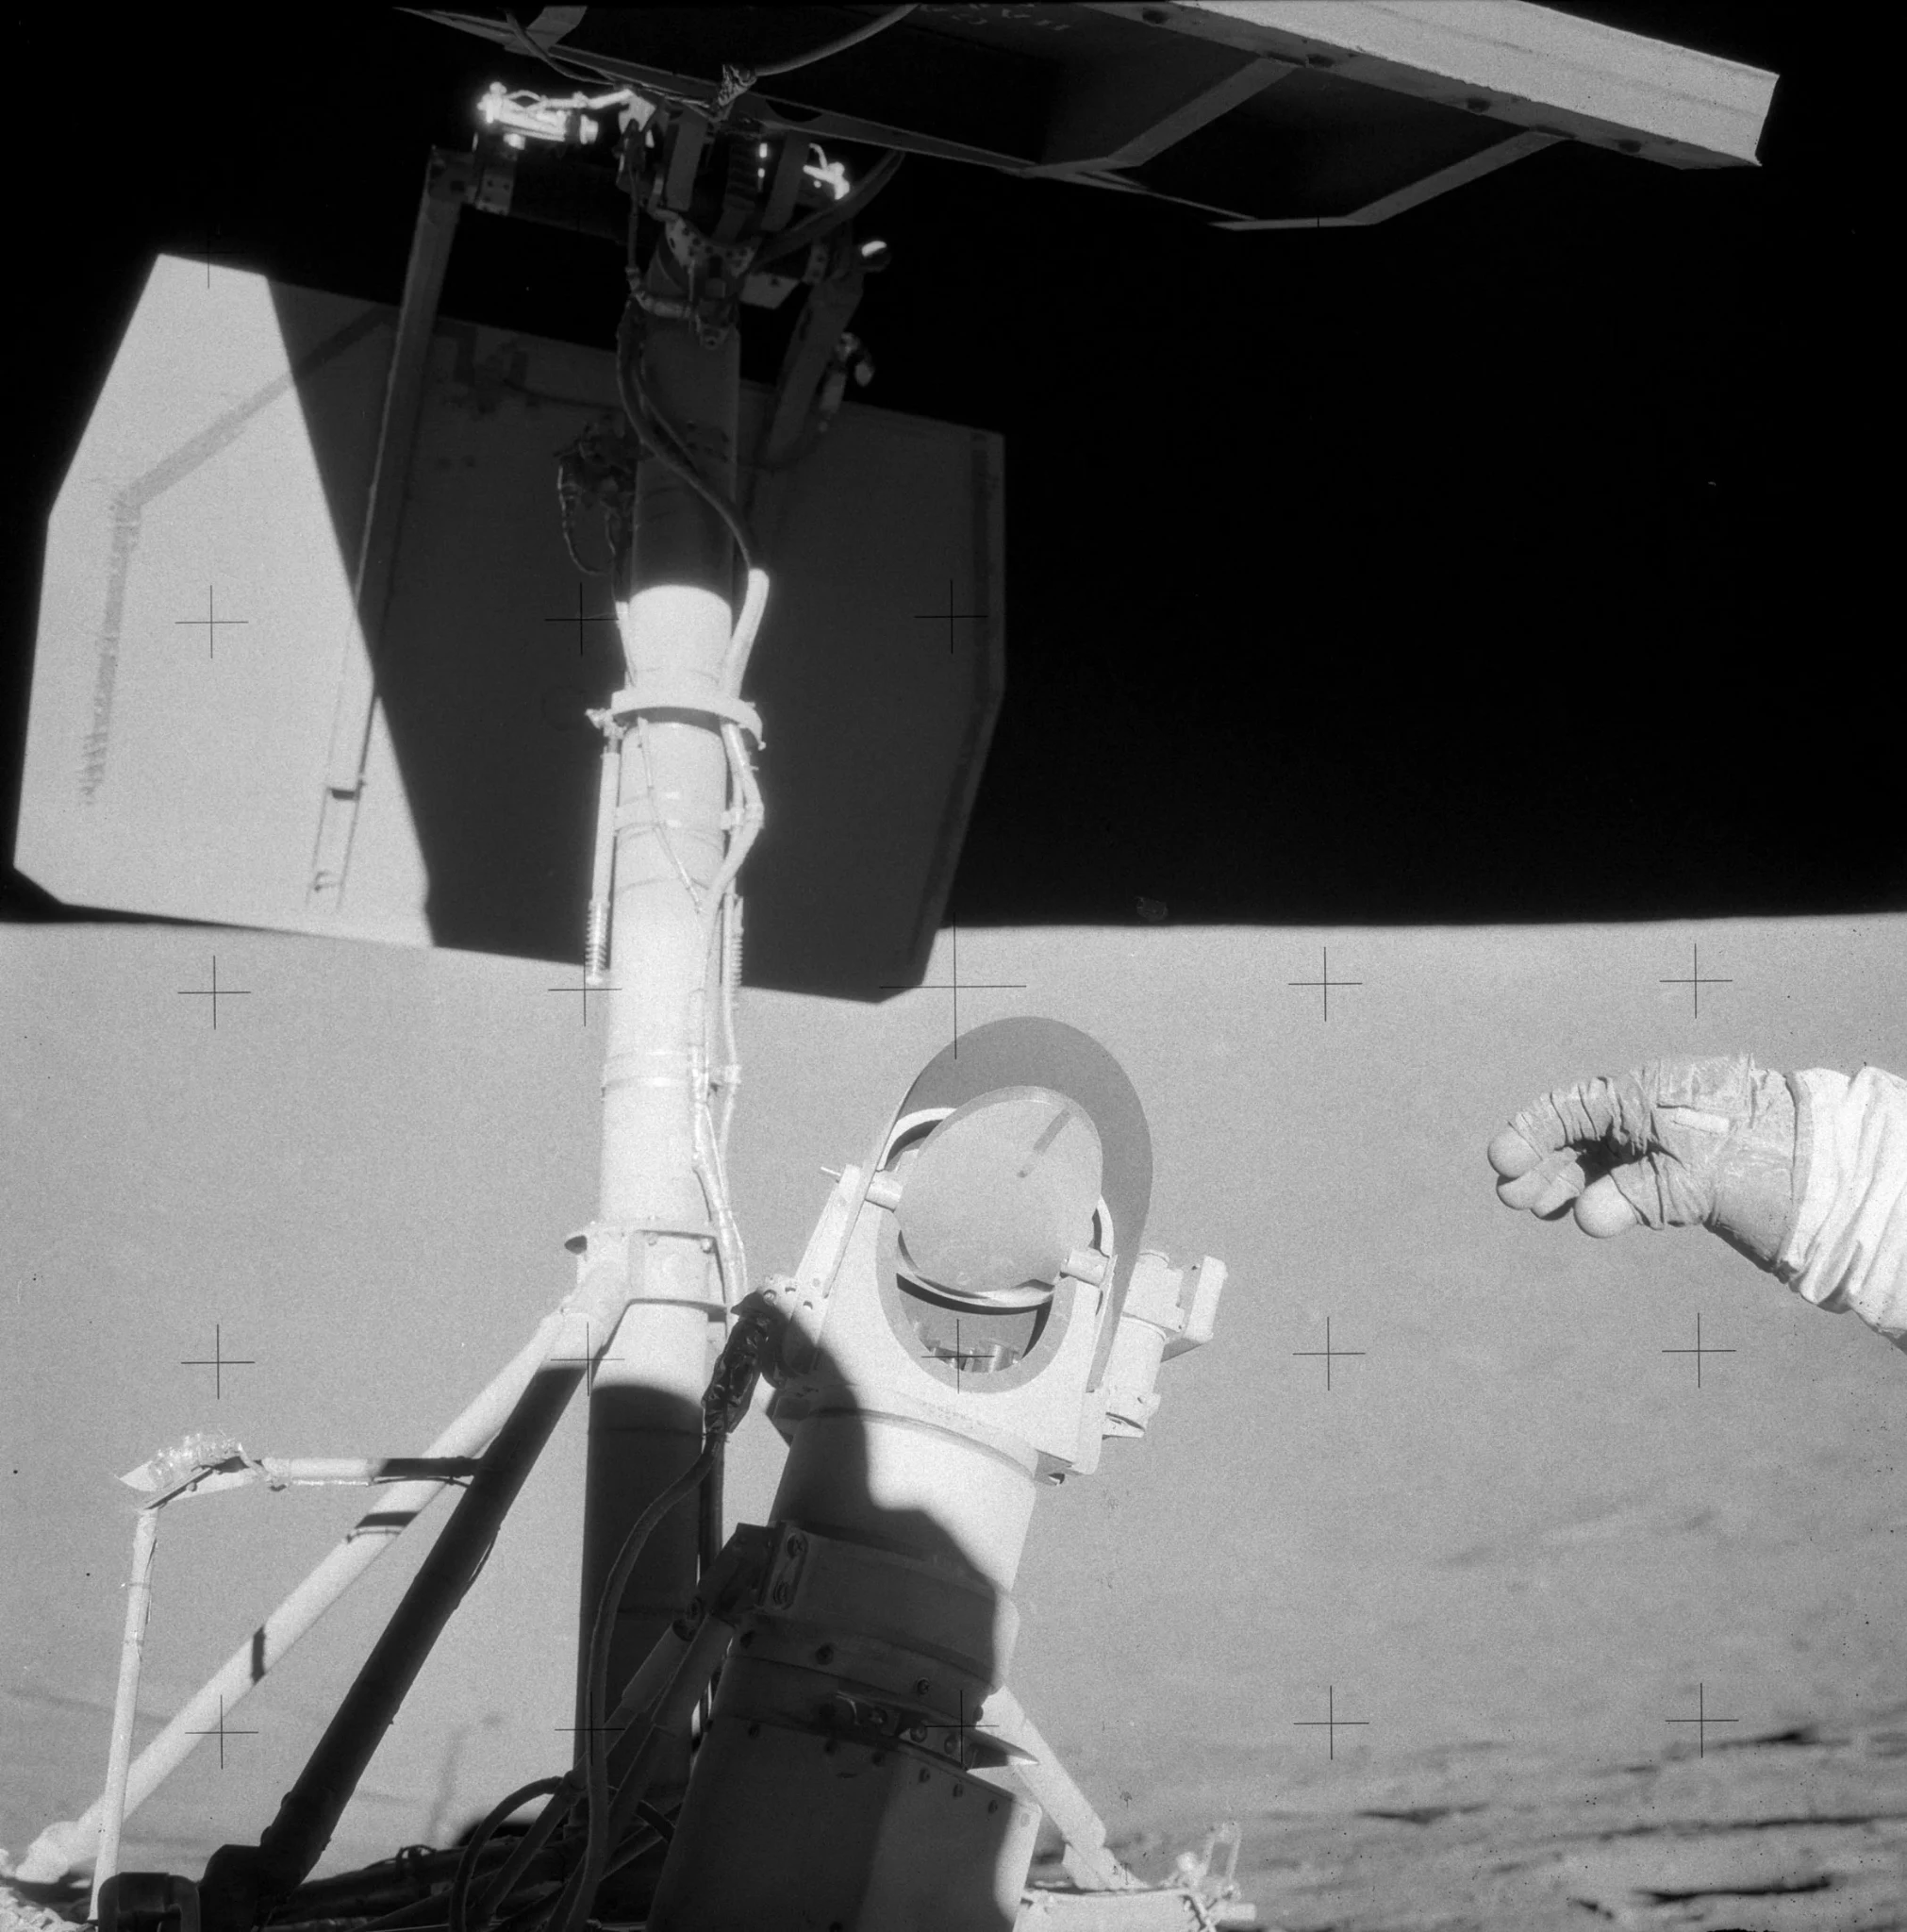 A large vertical pole holds metal panels aloft to the left of frame. In the center, a scientific instrument with a mirror covered in dust has had a single finger drawn across it, showing just how dusty it is. To the right of frame is an astronaut’s outstretched hand. https://www.nasa.gov/history/alsj/picture.html